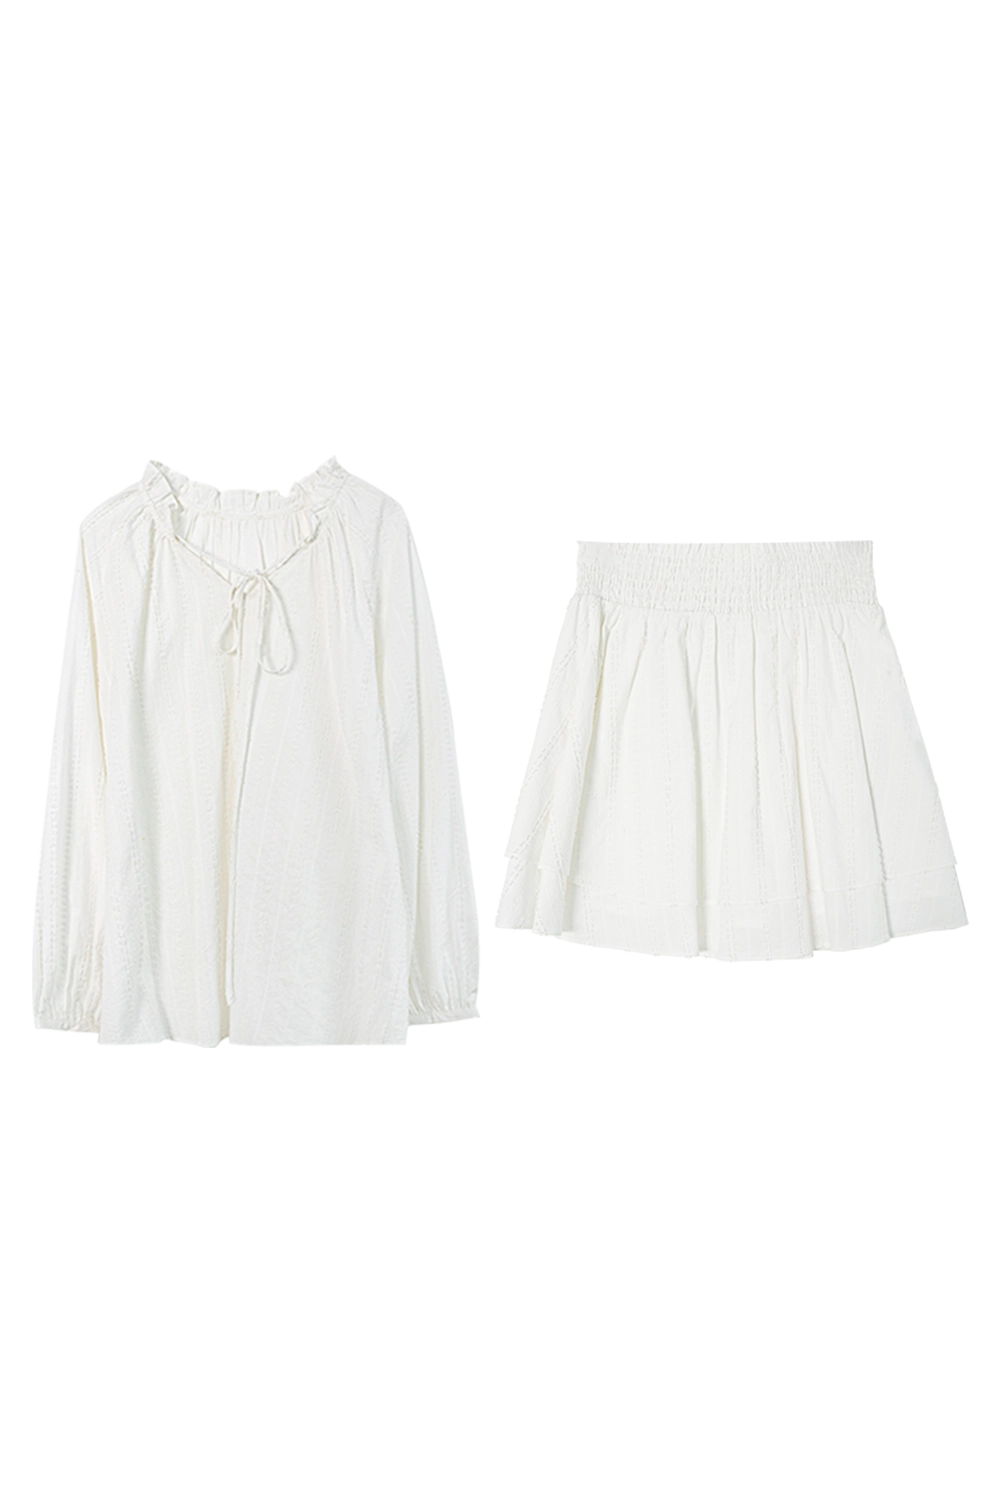 Chic Ensemble: Ruffled Collar Blouse and Tiered Skirt Set